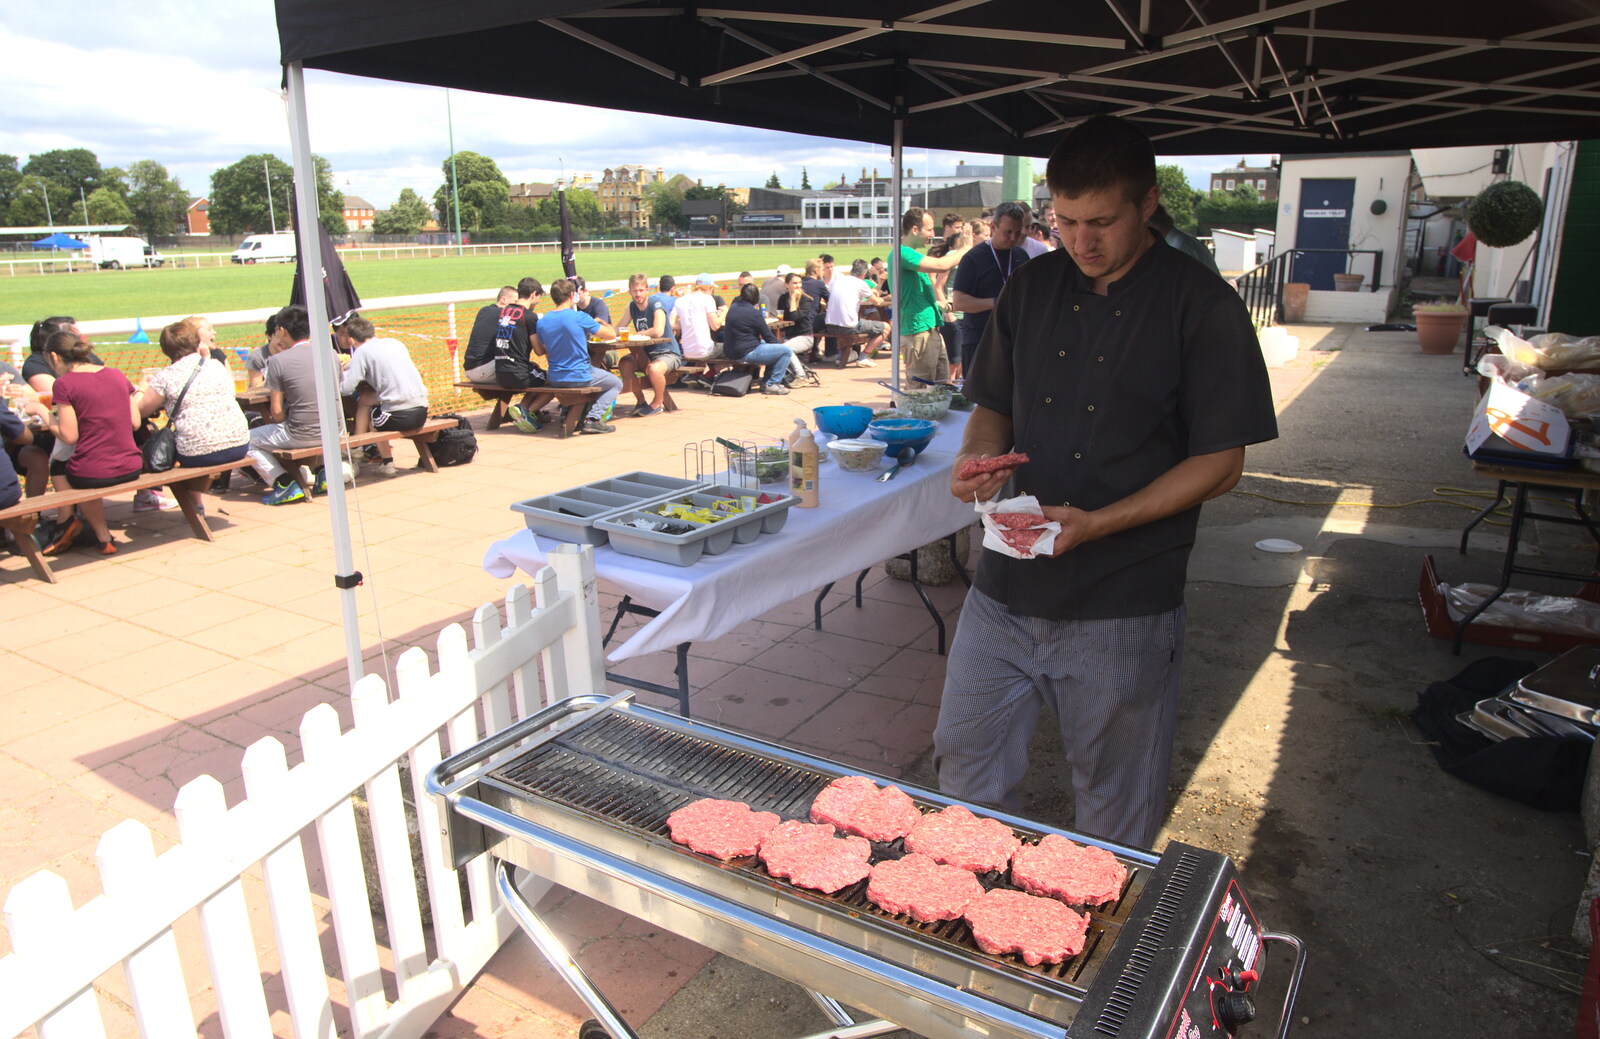 More burgers are sacrificed from It's a SwiftKey Knockout, Richmond Rugby Club, Richmond, Surrey - 7th July 2015